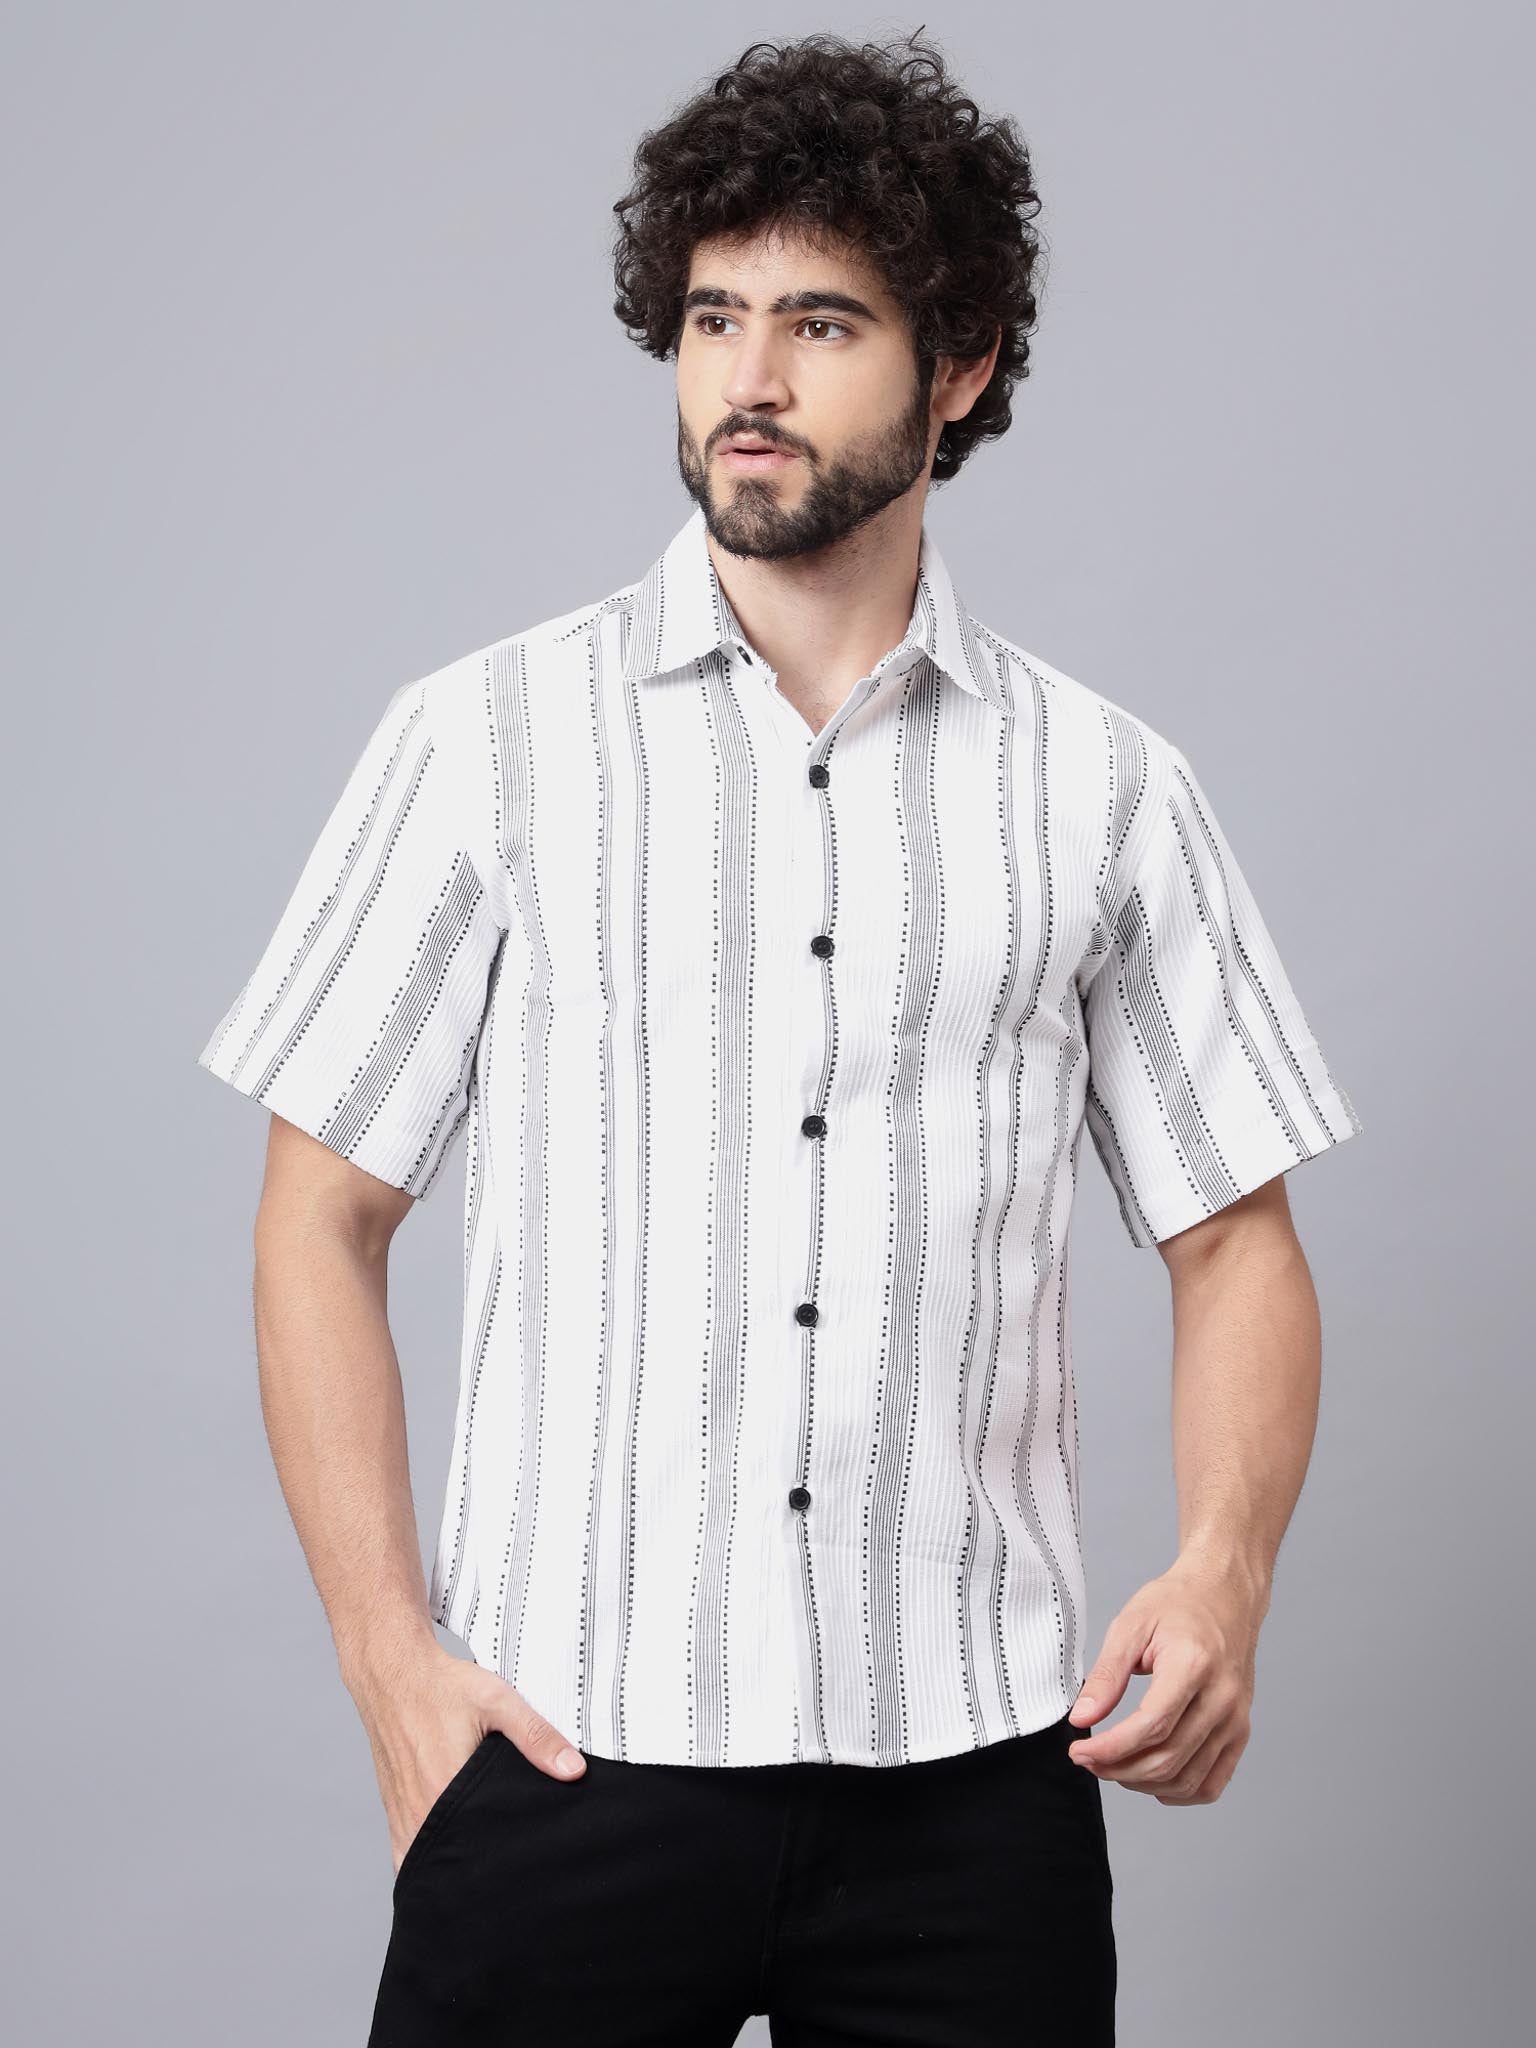 White Wave | White & Black Abstract Summer Shirt | Luxeliv Men 